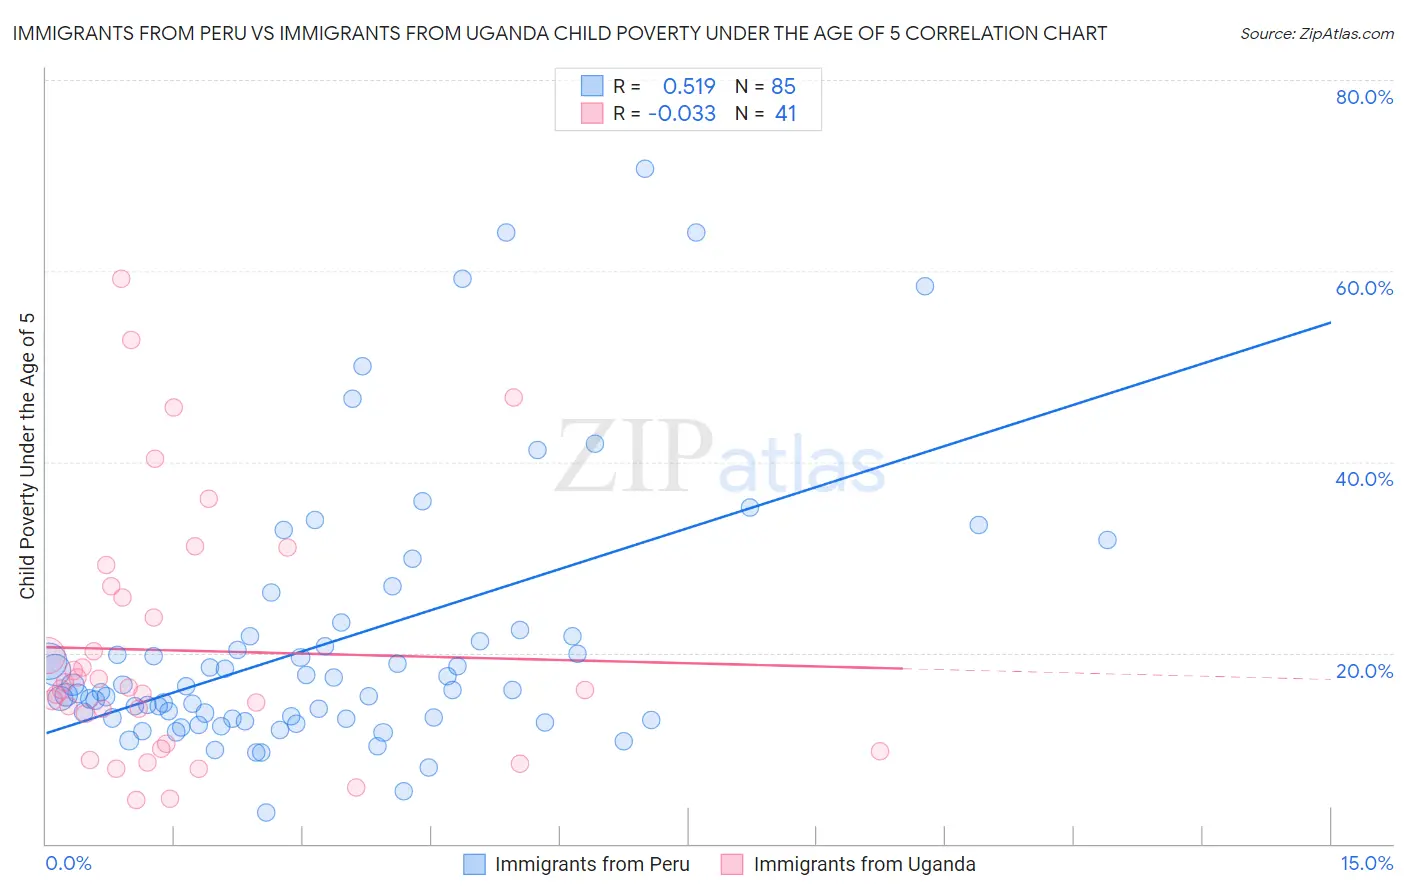 Immigrants from Peru vs Immigrants from Uganda Child Poverty Under the Age of 5